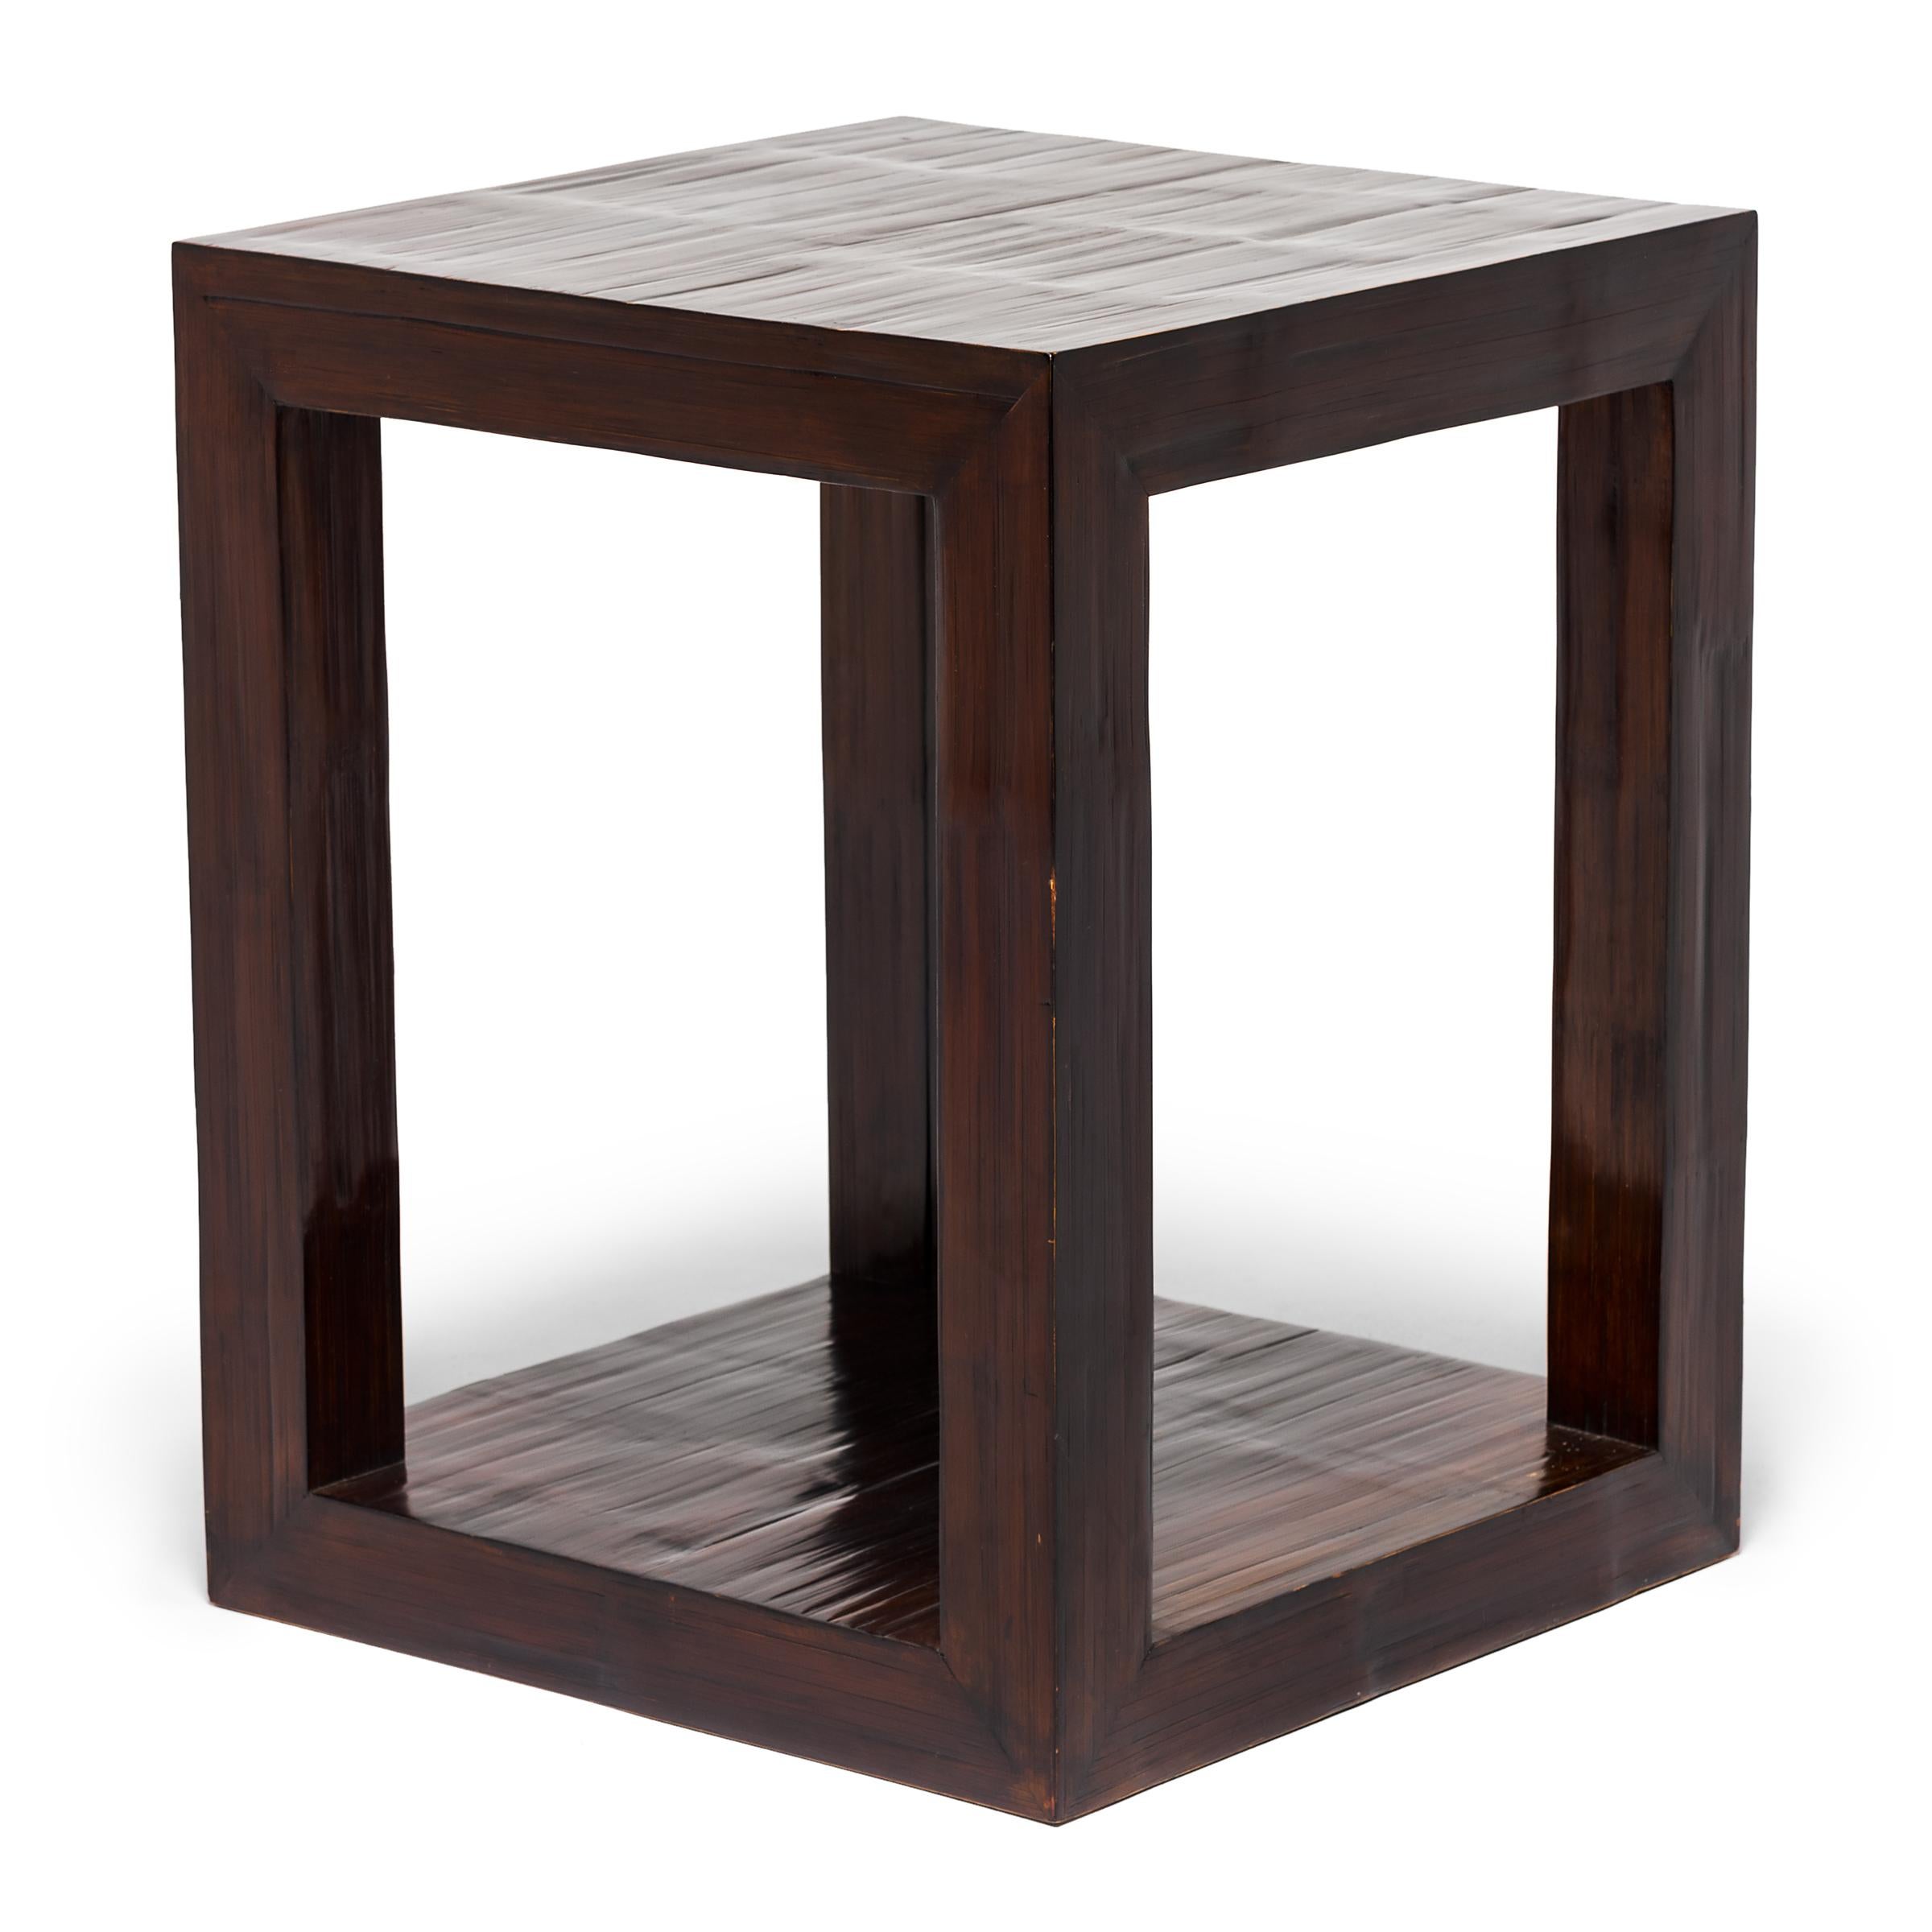 It’s difficult to distinguish this spare pedestal from a modern Parson’s side table. Both exhibit clean lines and a great silhouette. Crushed bamboo brings subtle texture to the Minimalist design, and the dark lacquer brings out its sculptural